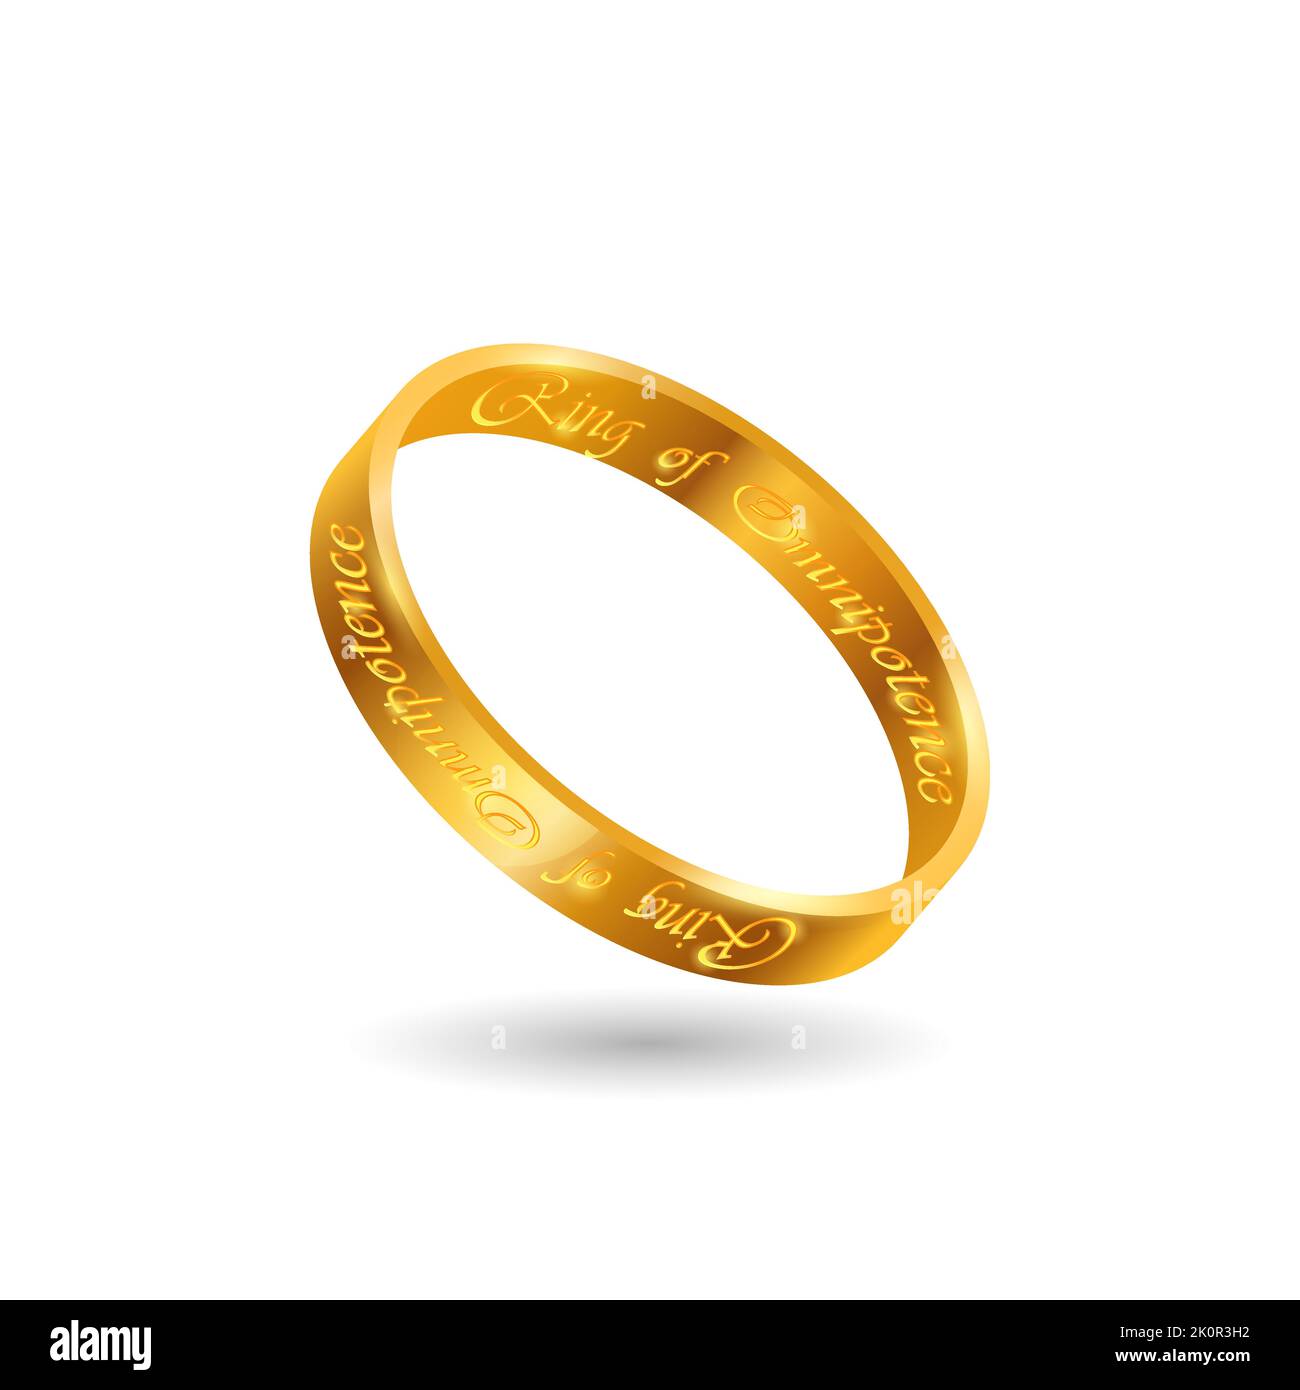 Golden ring of omnipotence. Powerful artifact of magical power Stock Vector